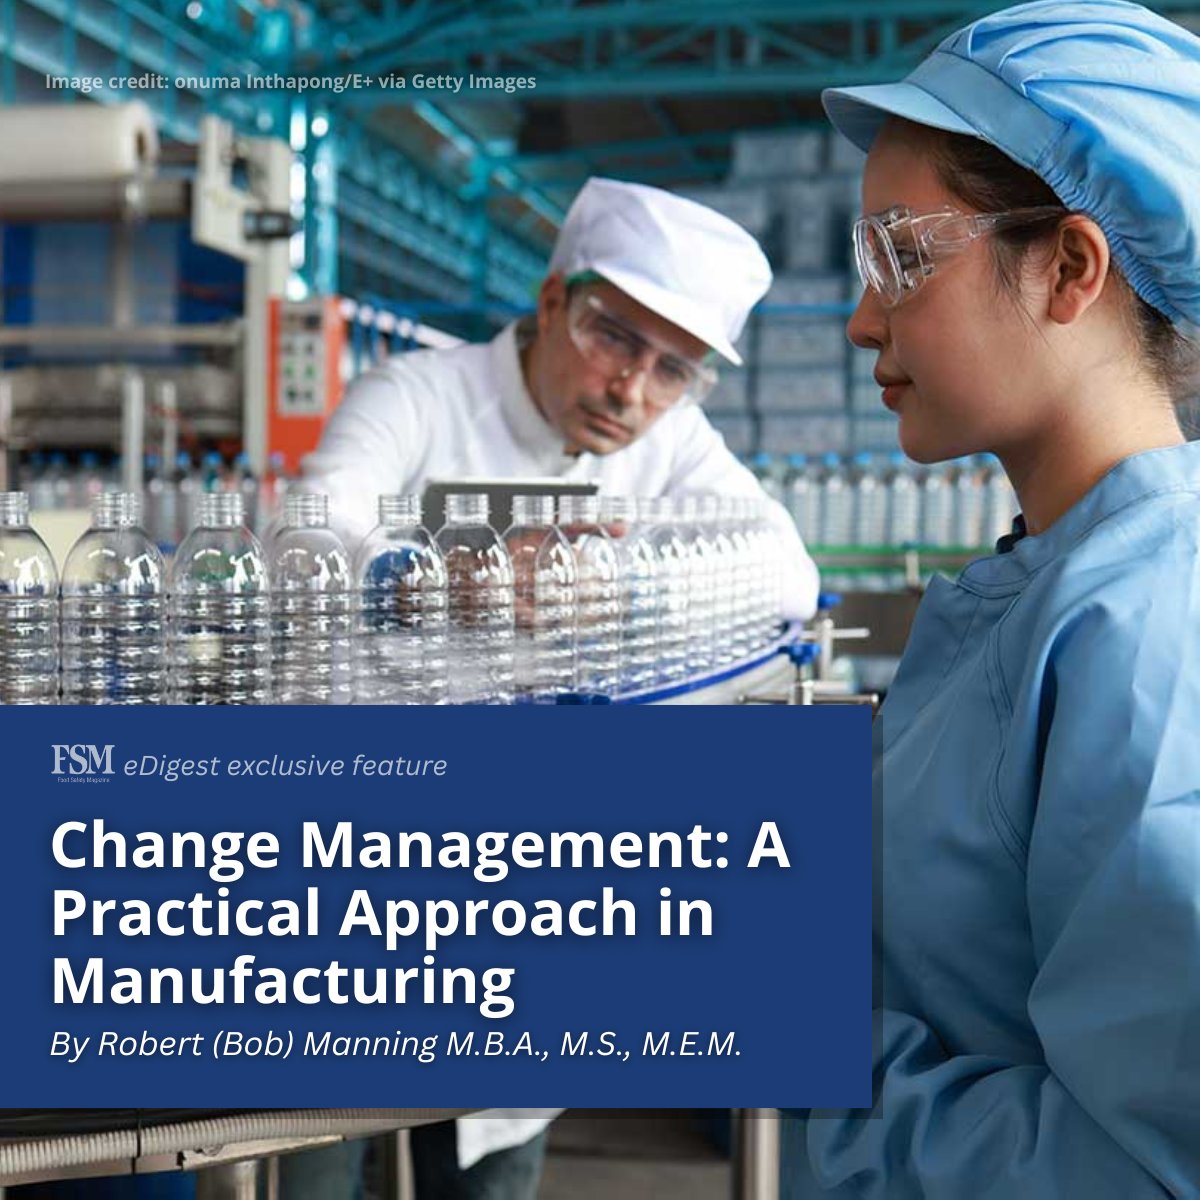 Successful change management programs provide transparency into the manufacturing process and allow for guidance and collaboration to help improve changes. (free subscription required) 💡👉 brnw.ch/21wJxQ9 

#foodsafety #foodindustry #changemanagement